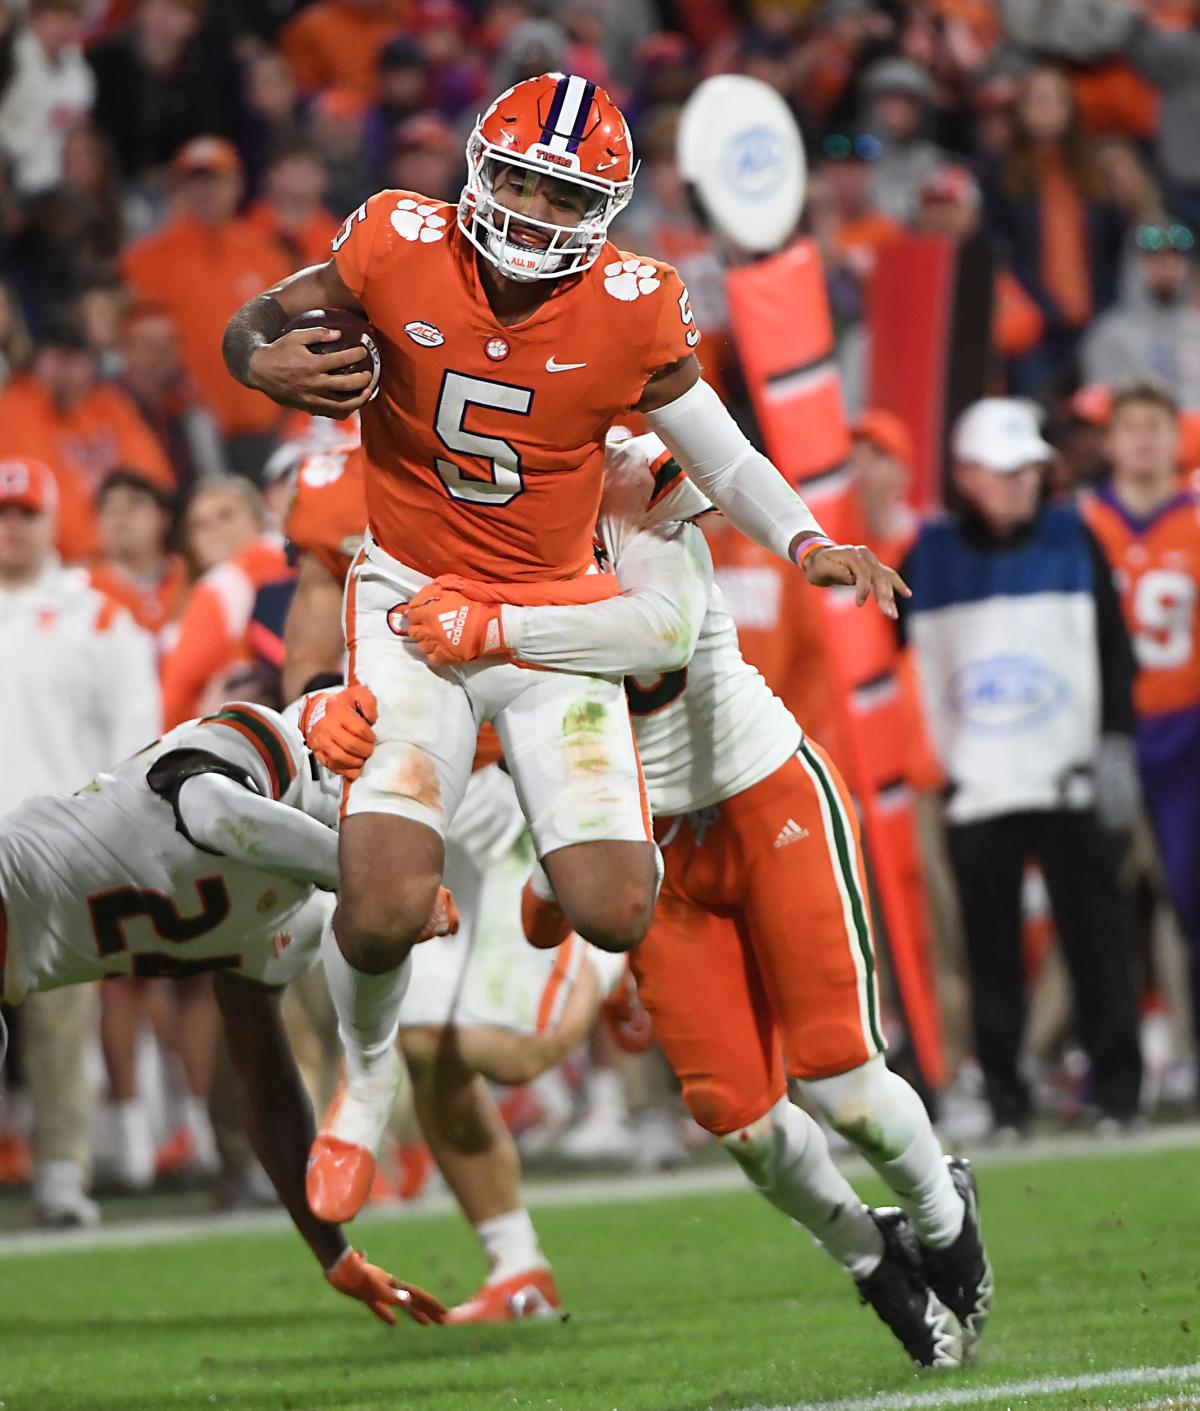 Clemson Football vs. South Carolina Our final score predictions are in